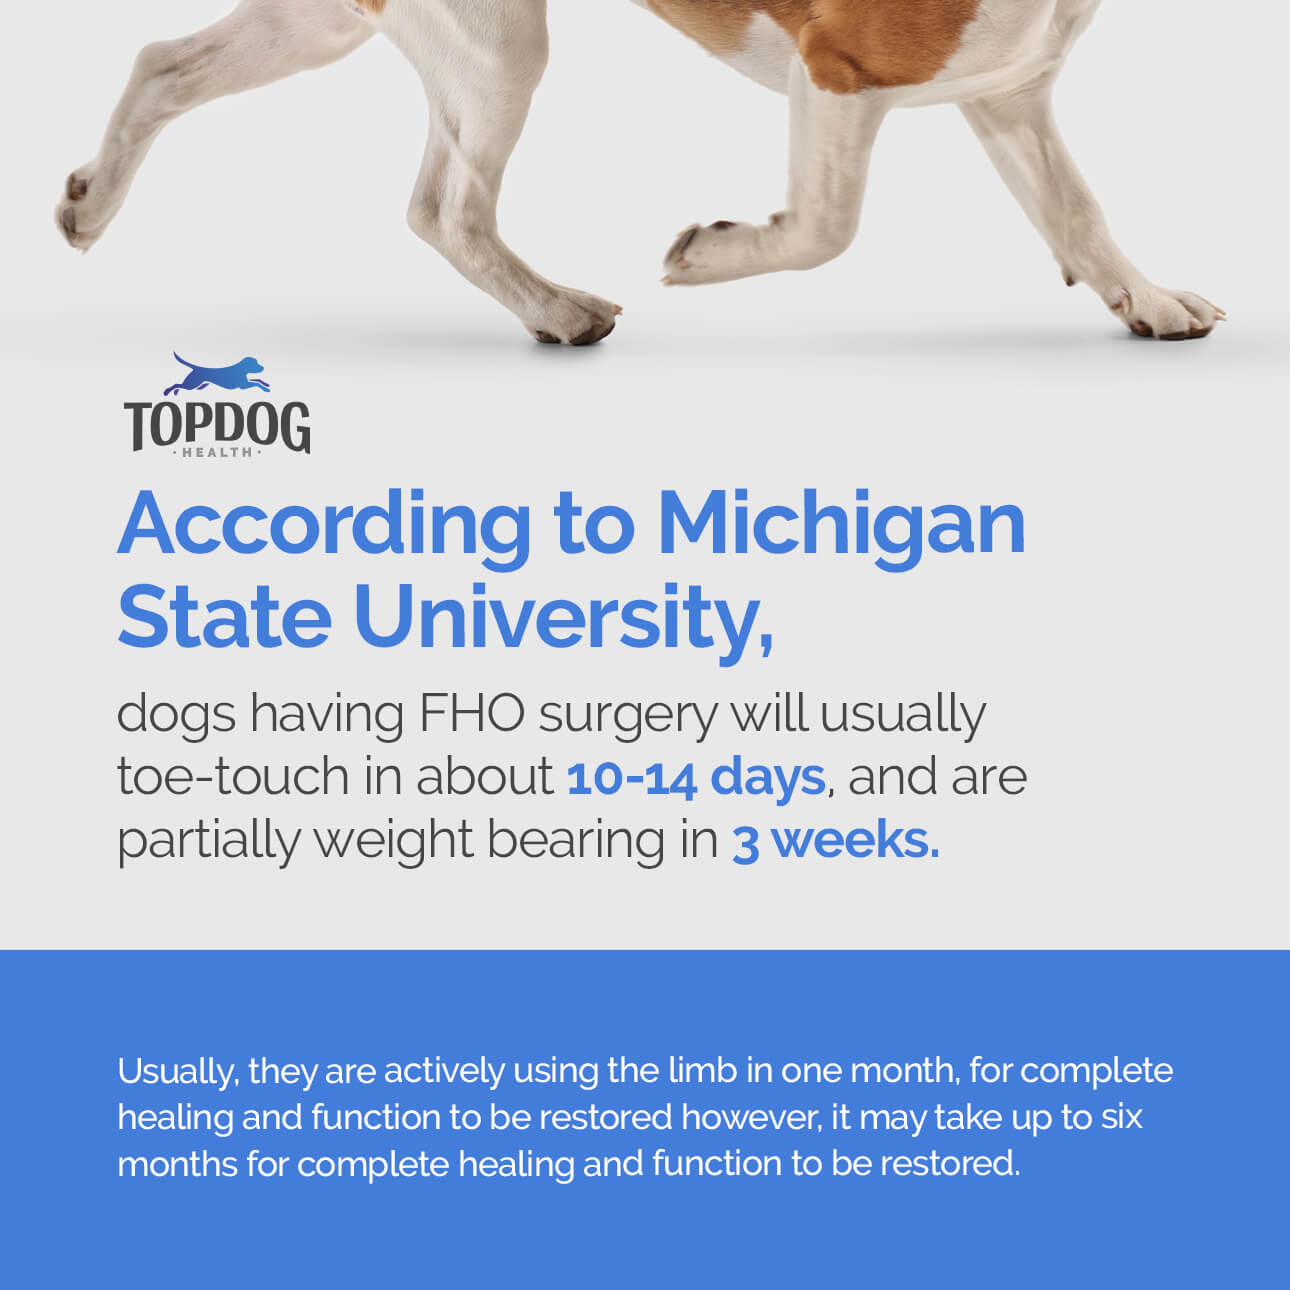 FHO Recovery: According to Michigan State University, dogs having FHO surgery will usually toe-touch in about 10-14 days.